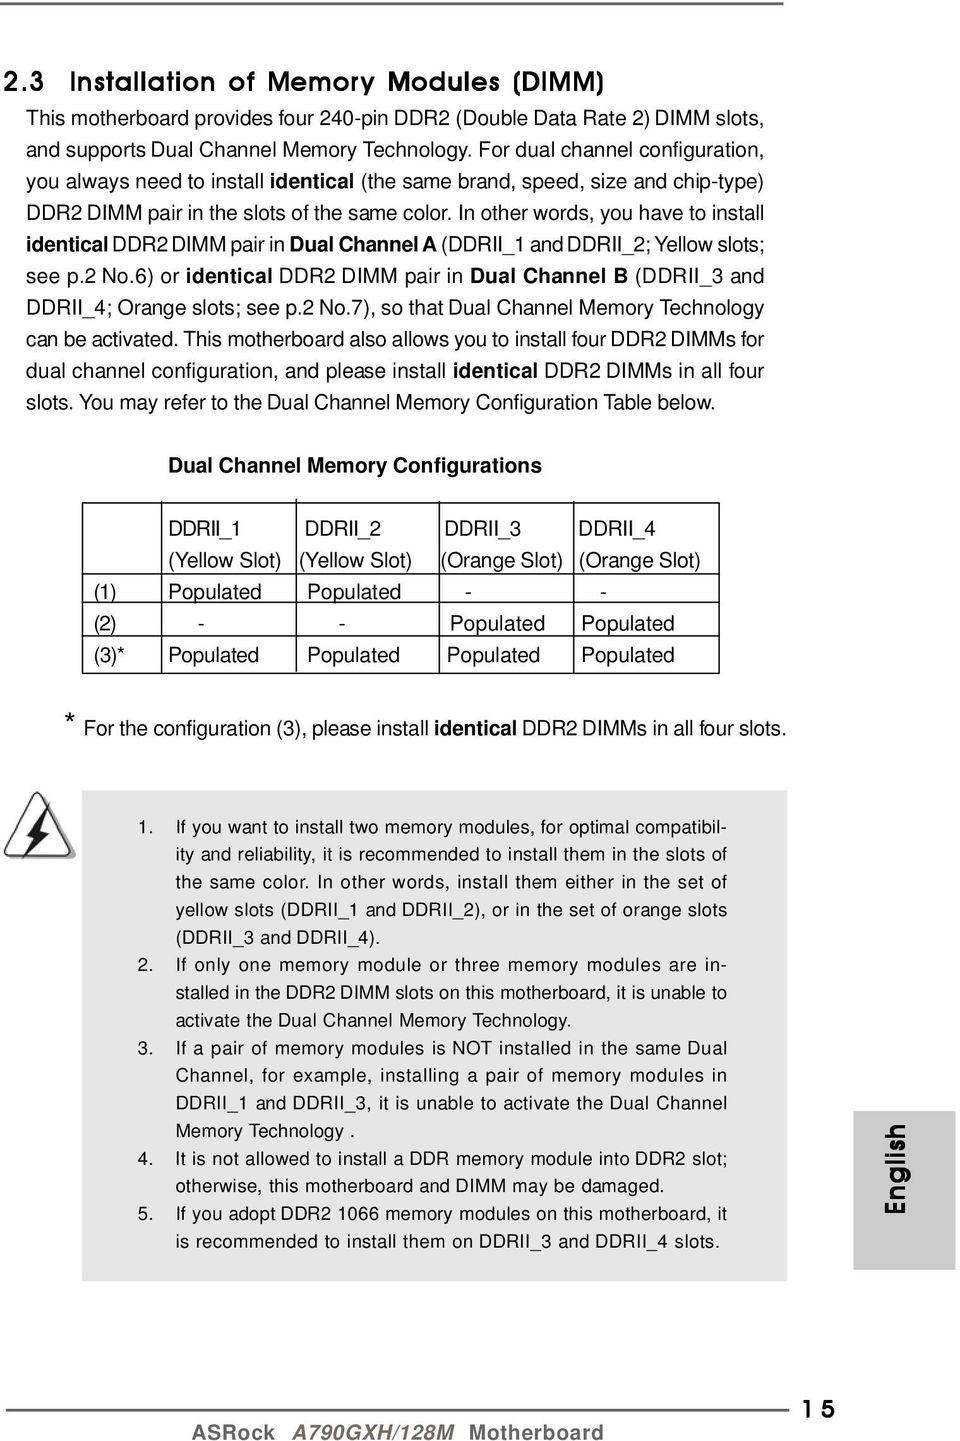 In other words, you have to install identical DDR2 DIMM pair in Dual Channel A (DDRII_1 and DDRII_2; Yellow slots; see p.2 No.